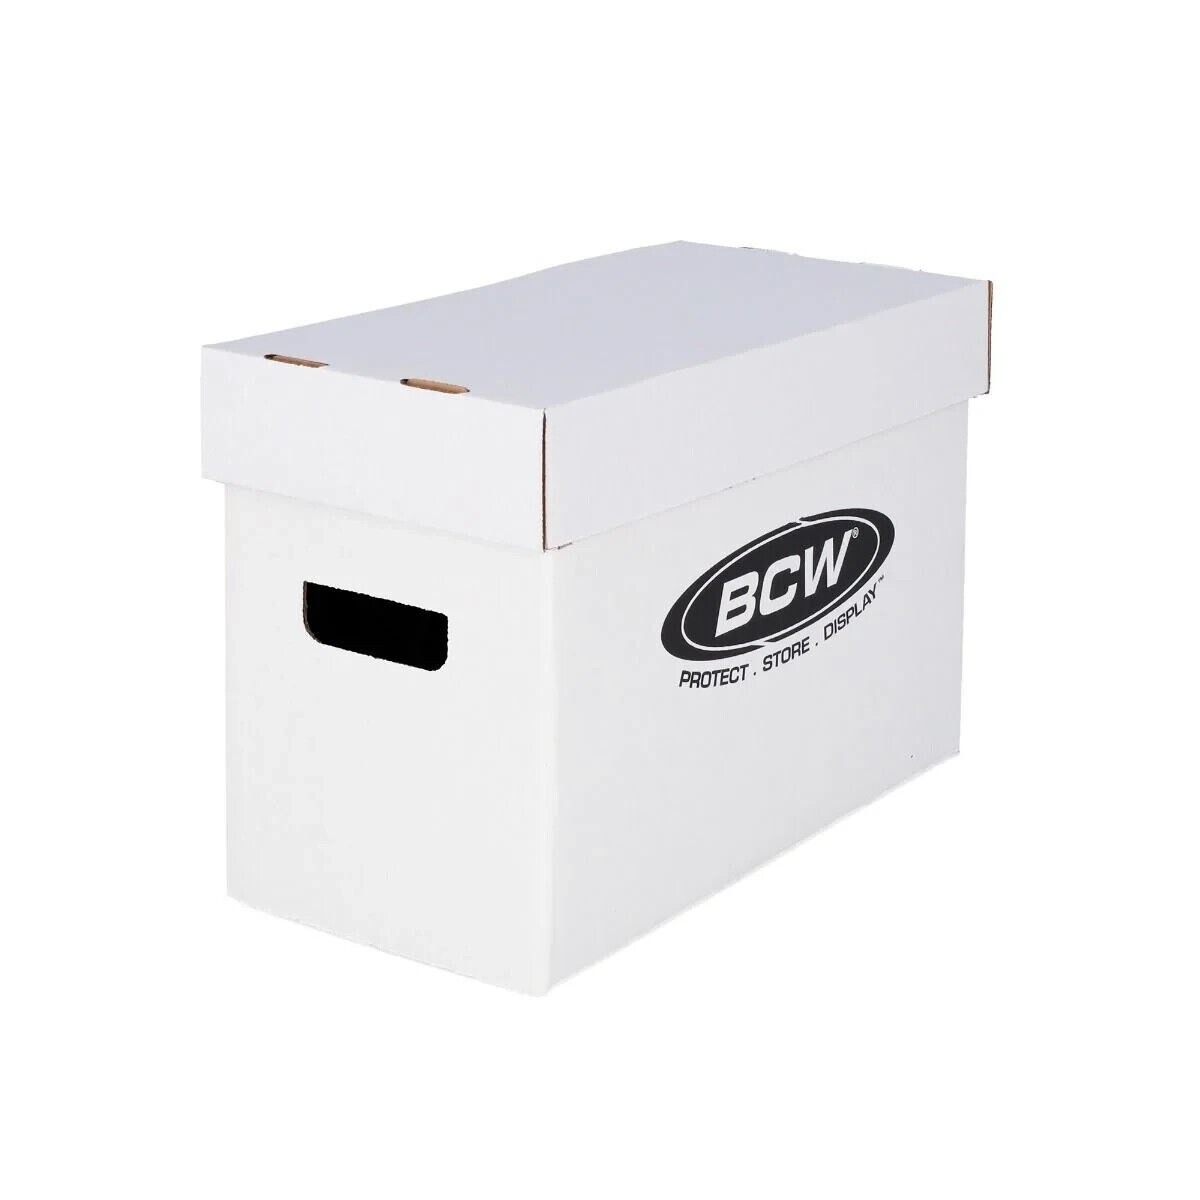 5 PACK BCW New Short Comic Book Storage Box Holds 150-175 Comics Each- PACK OF 5